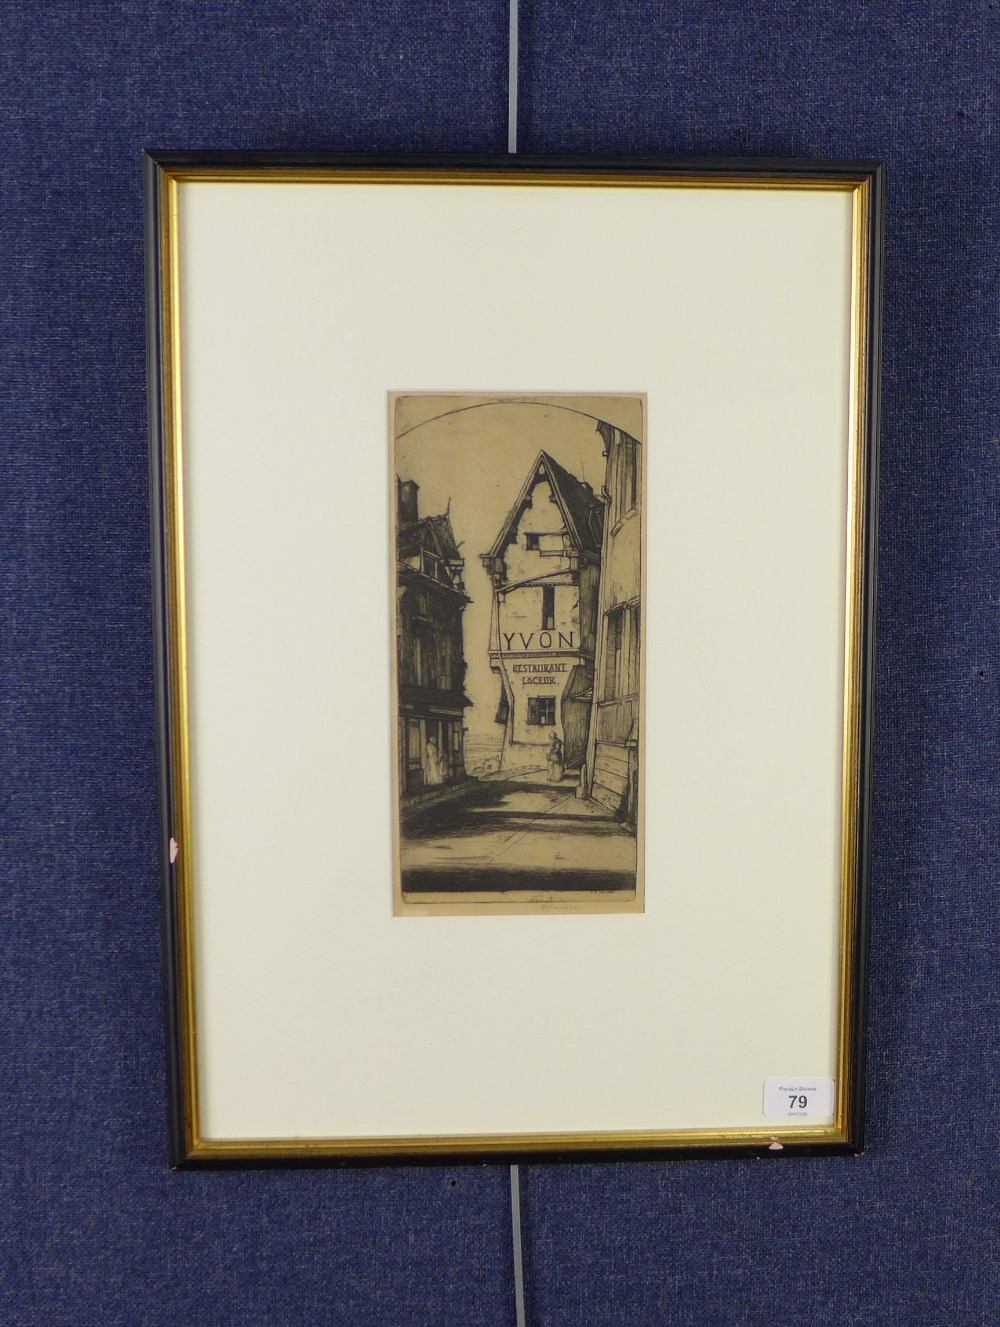 DY Cameron, Yvon Restaurant, etching, signed in pencil, framed under glass, 13 x 28cm - Image 2 of 4